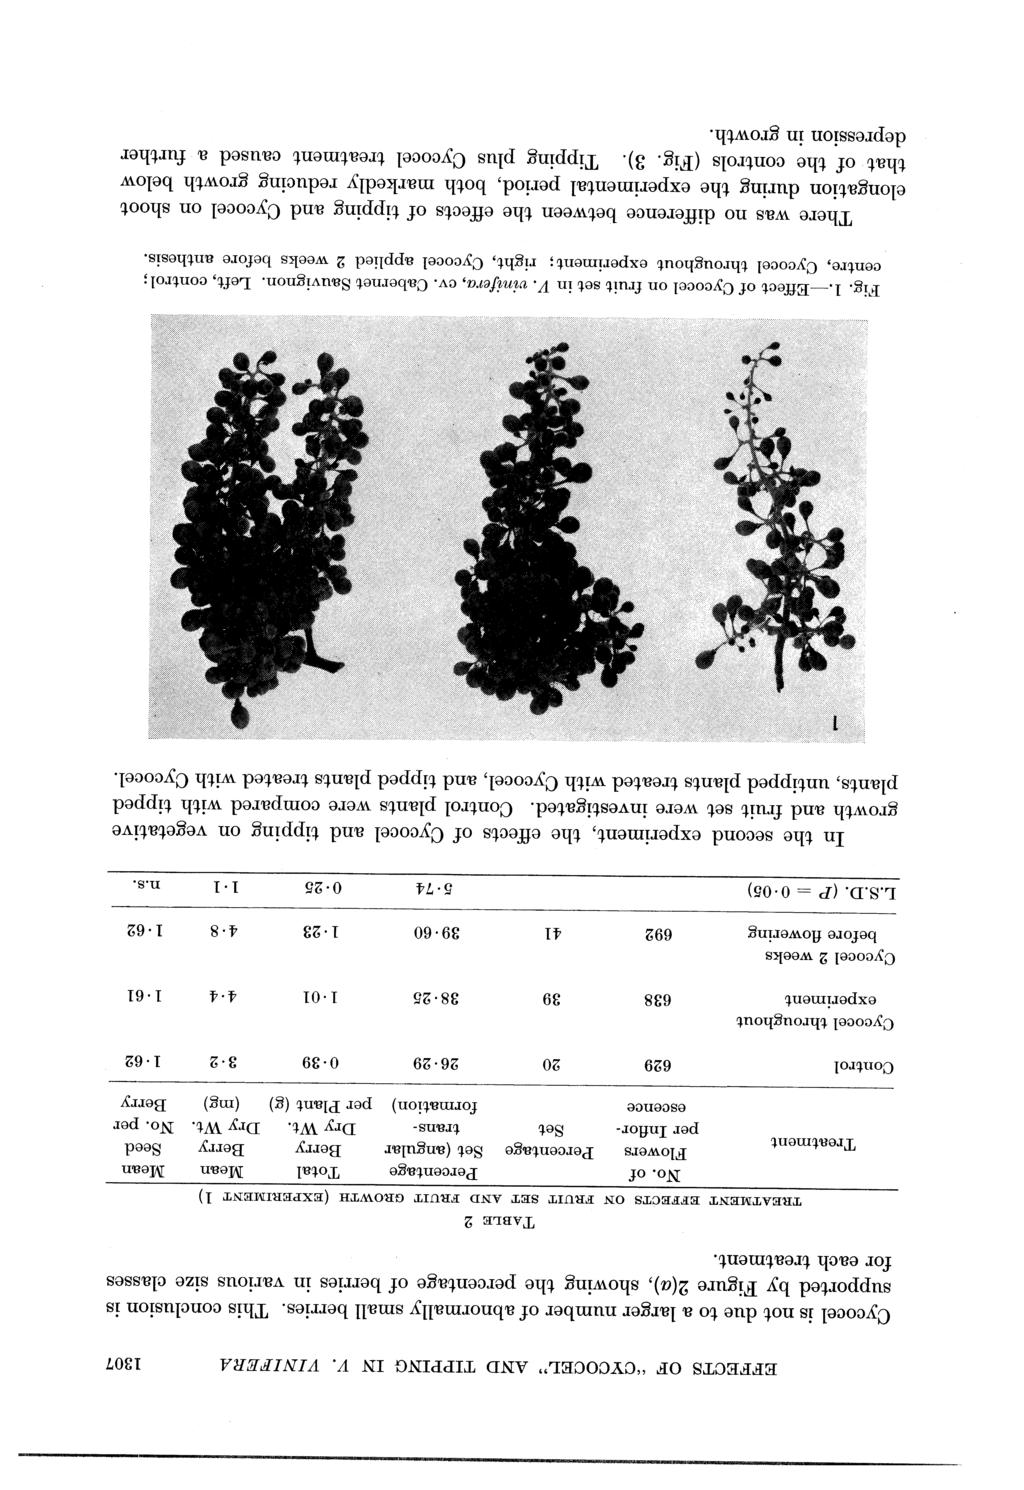 EFFECTS OF "CYCOCEL" AND TIPPING IN V. VINIFERA 1307 Cycocel is not due to a larger number of abnormally small berries.